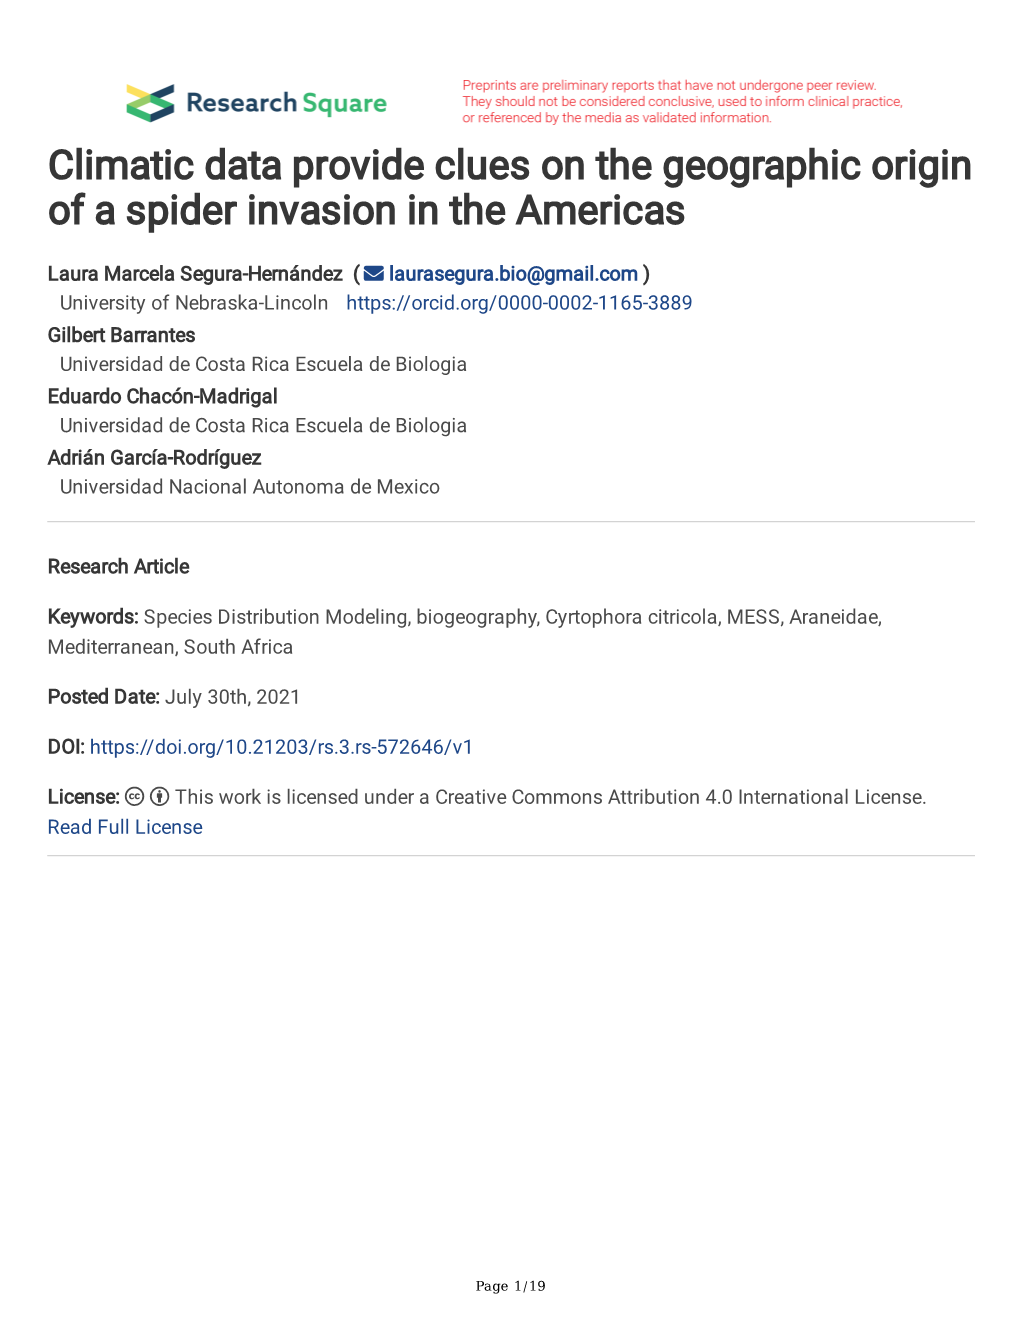 Climatic Data Provide Clues on the Geographic Origin of a Spider Invasion in the Americas